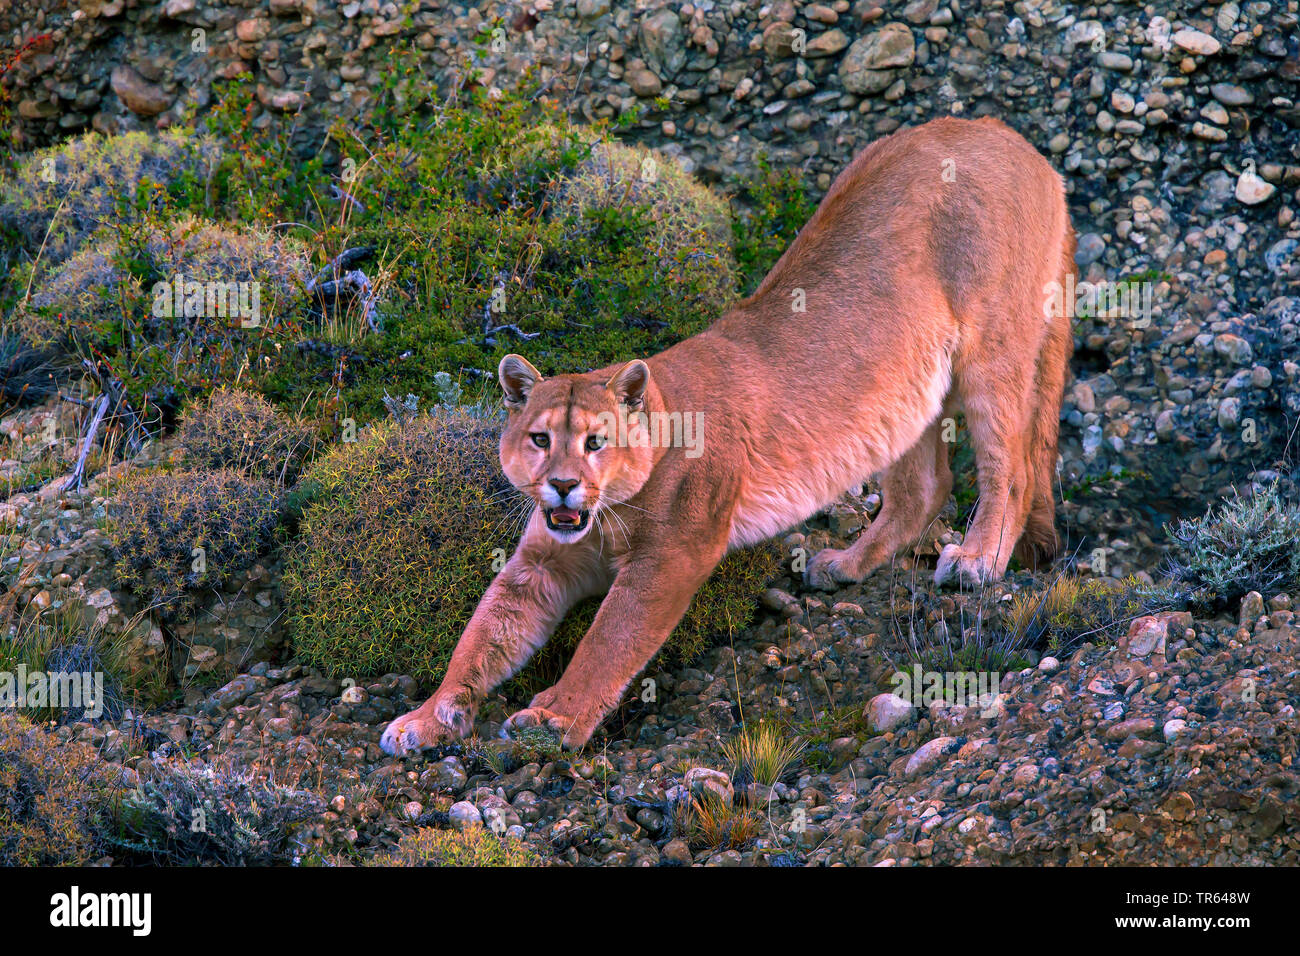 Southern South American cougar , Puma, Mountain lion, Cougar (Puma concolor  puma, Puma concolor patagonica, Puma patagonica, Puma concolor, Profelis  concolor, Felis concolor, Felis concolor patagonica), stretching, Chile,  Torres del Paine National